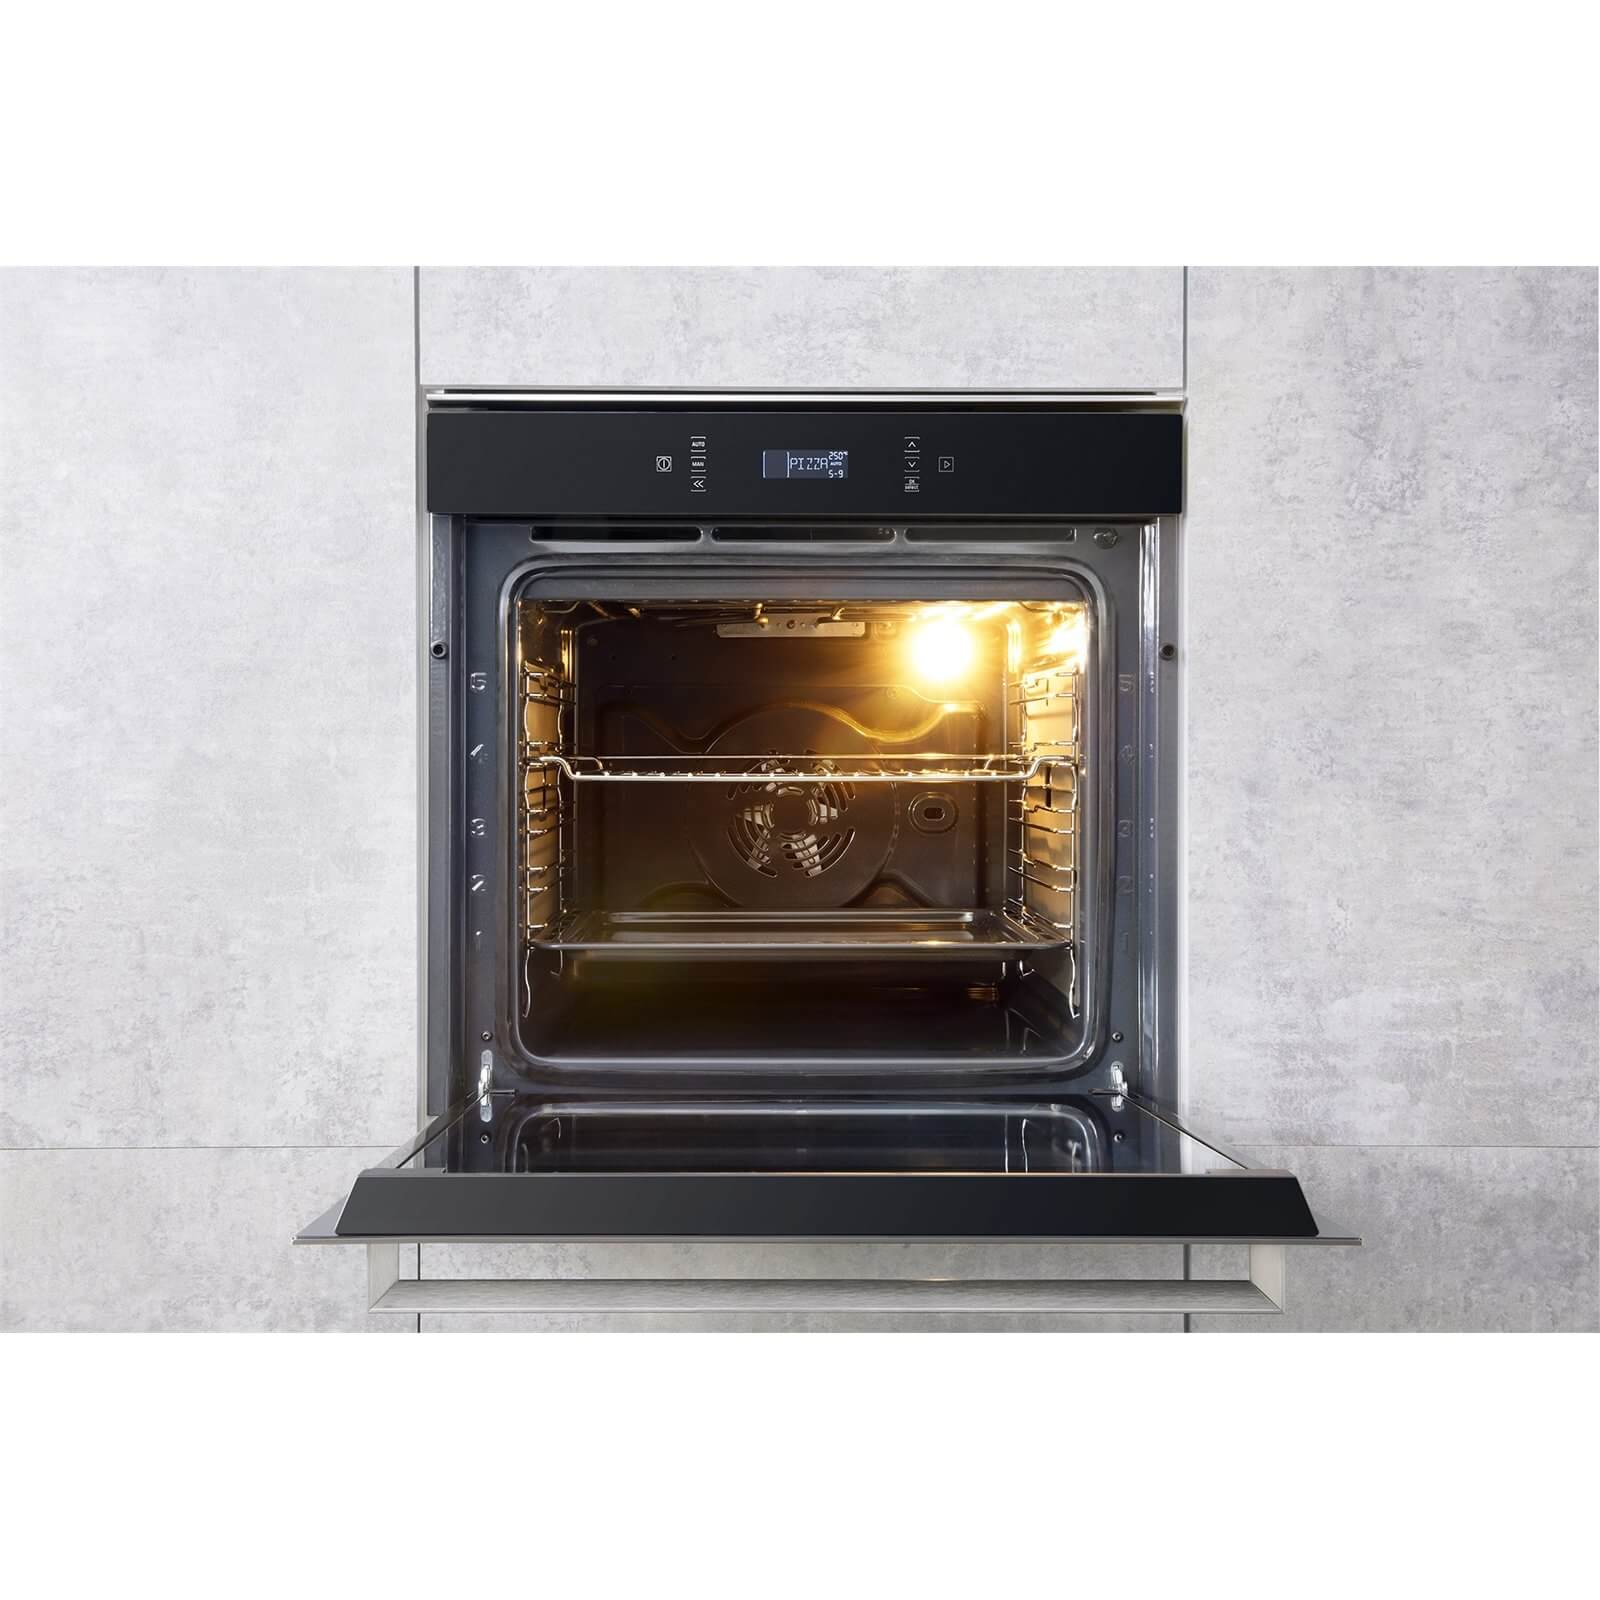 Hotpoint Class 7 SI7 871 SC IX Built-in Electric Oven - Stainless Steel